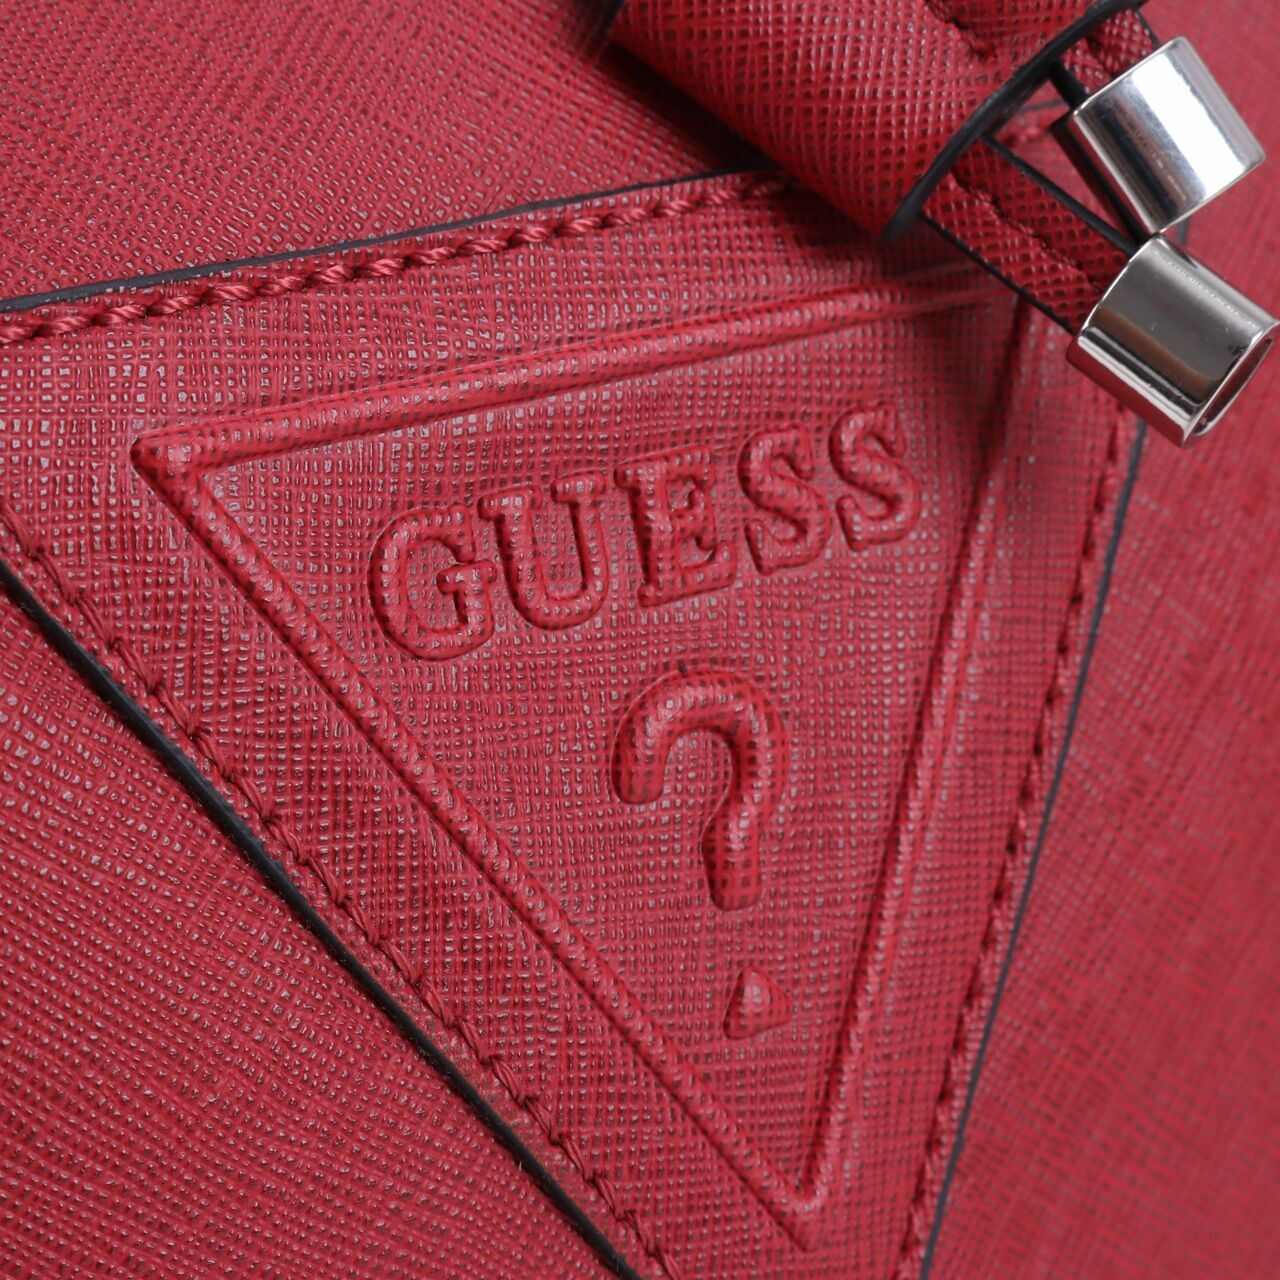 Guess Red Bucket Sling Bag